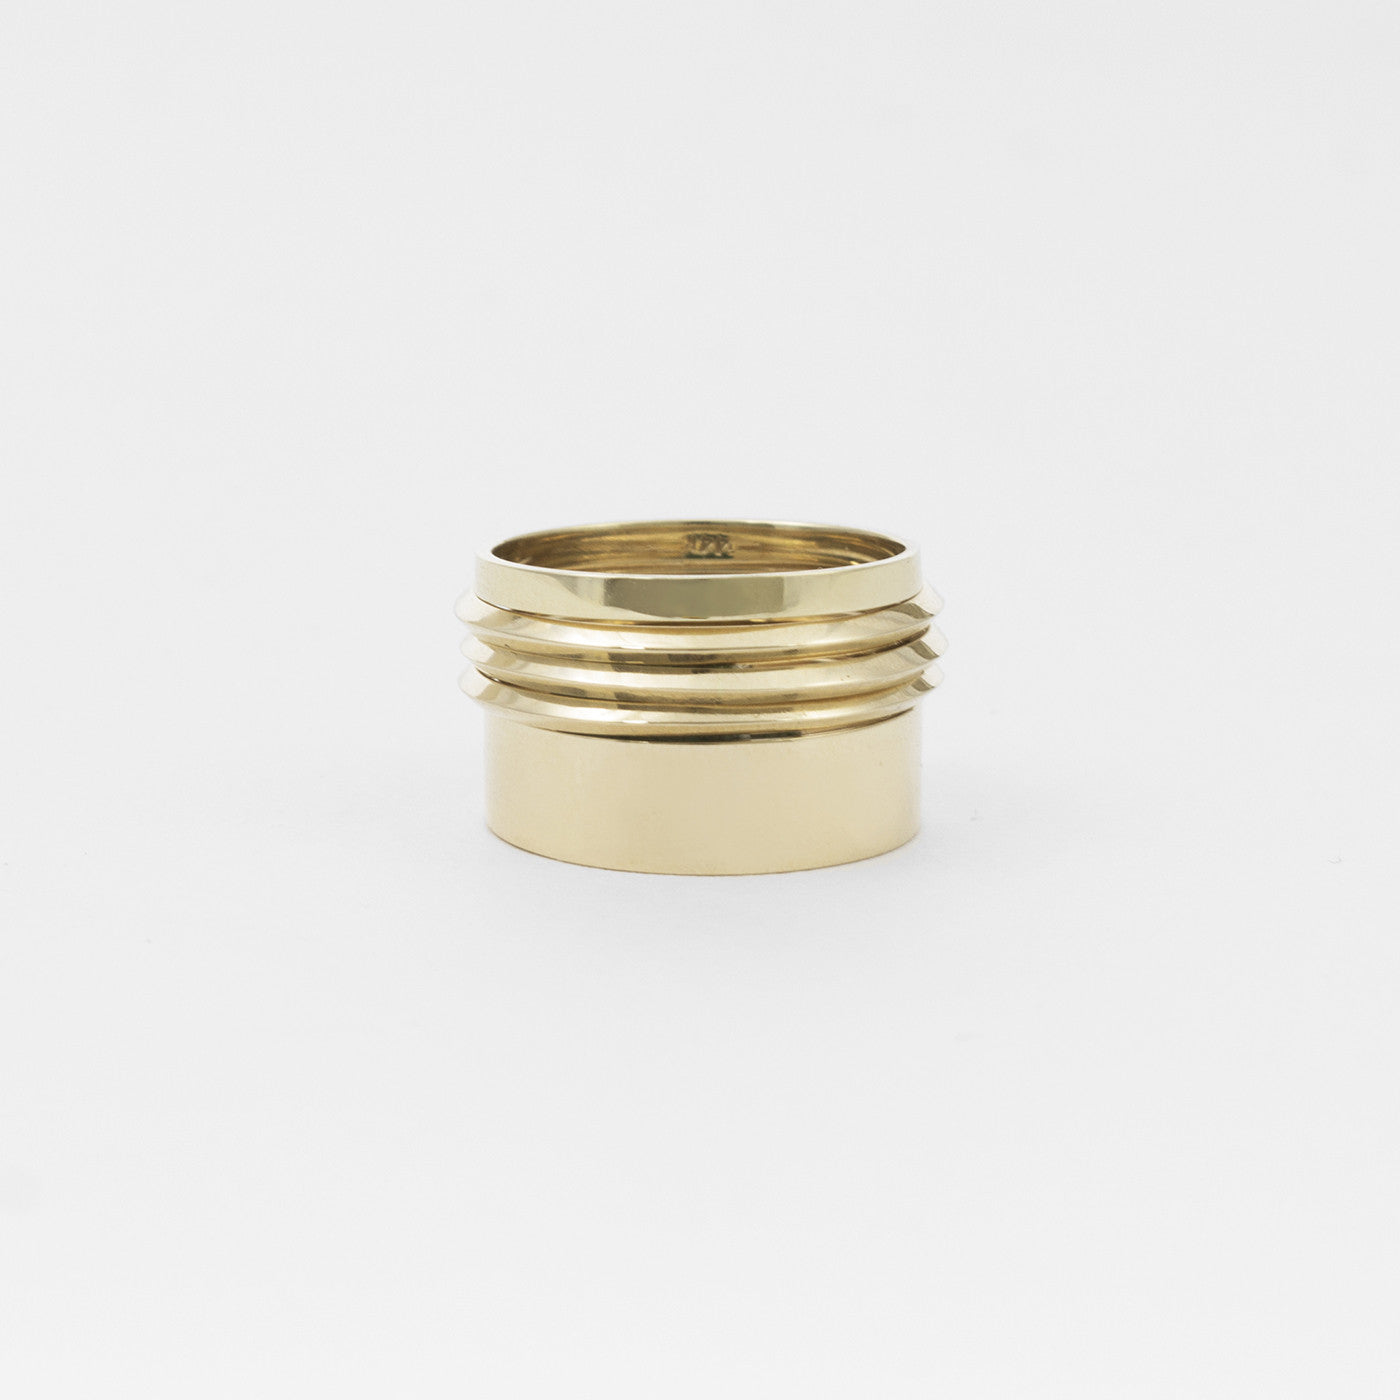 Rini Plain Ring in 14k Gold By SHW Fine Jewelry NYC